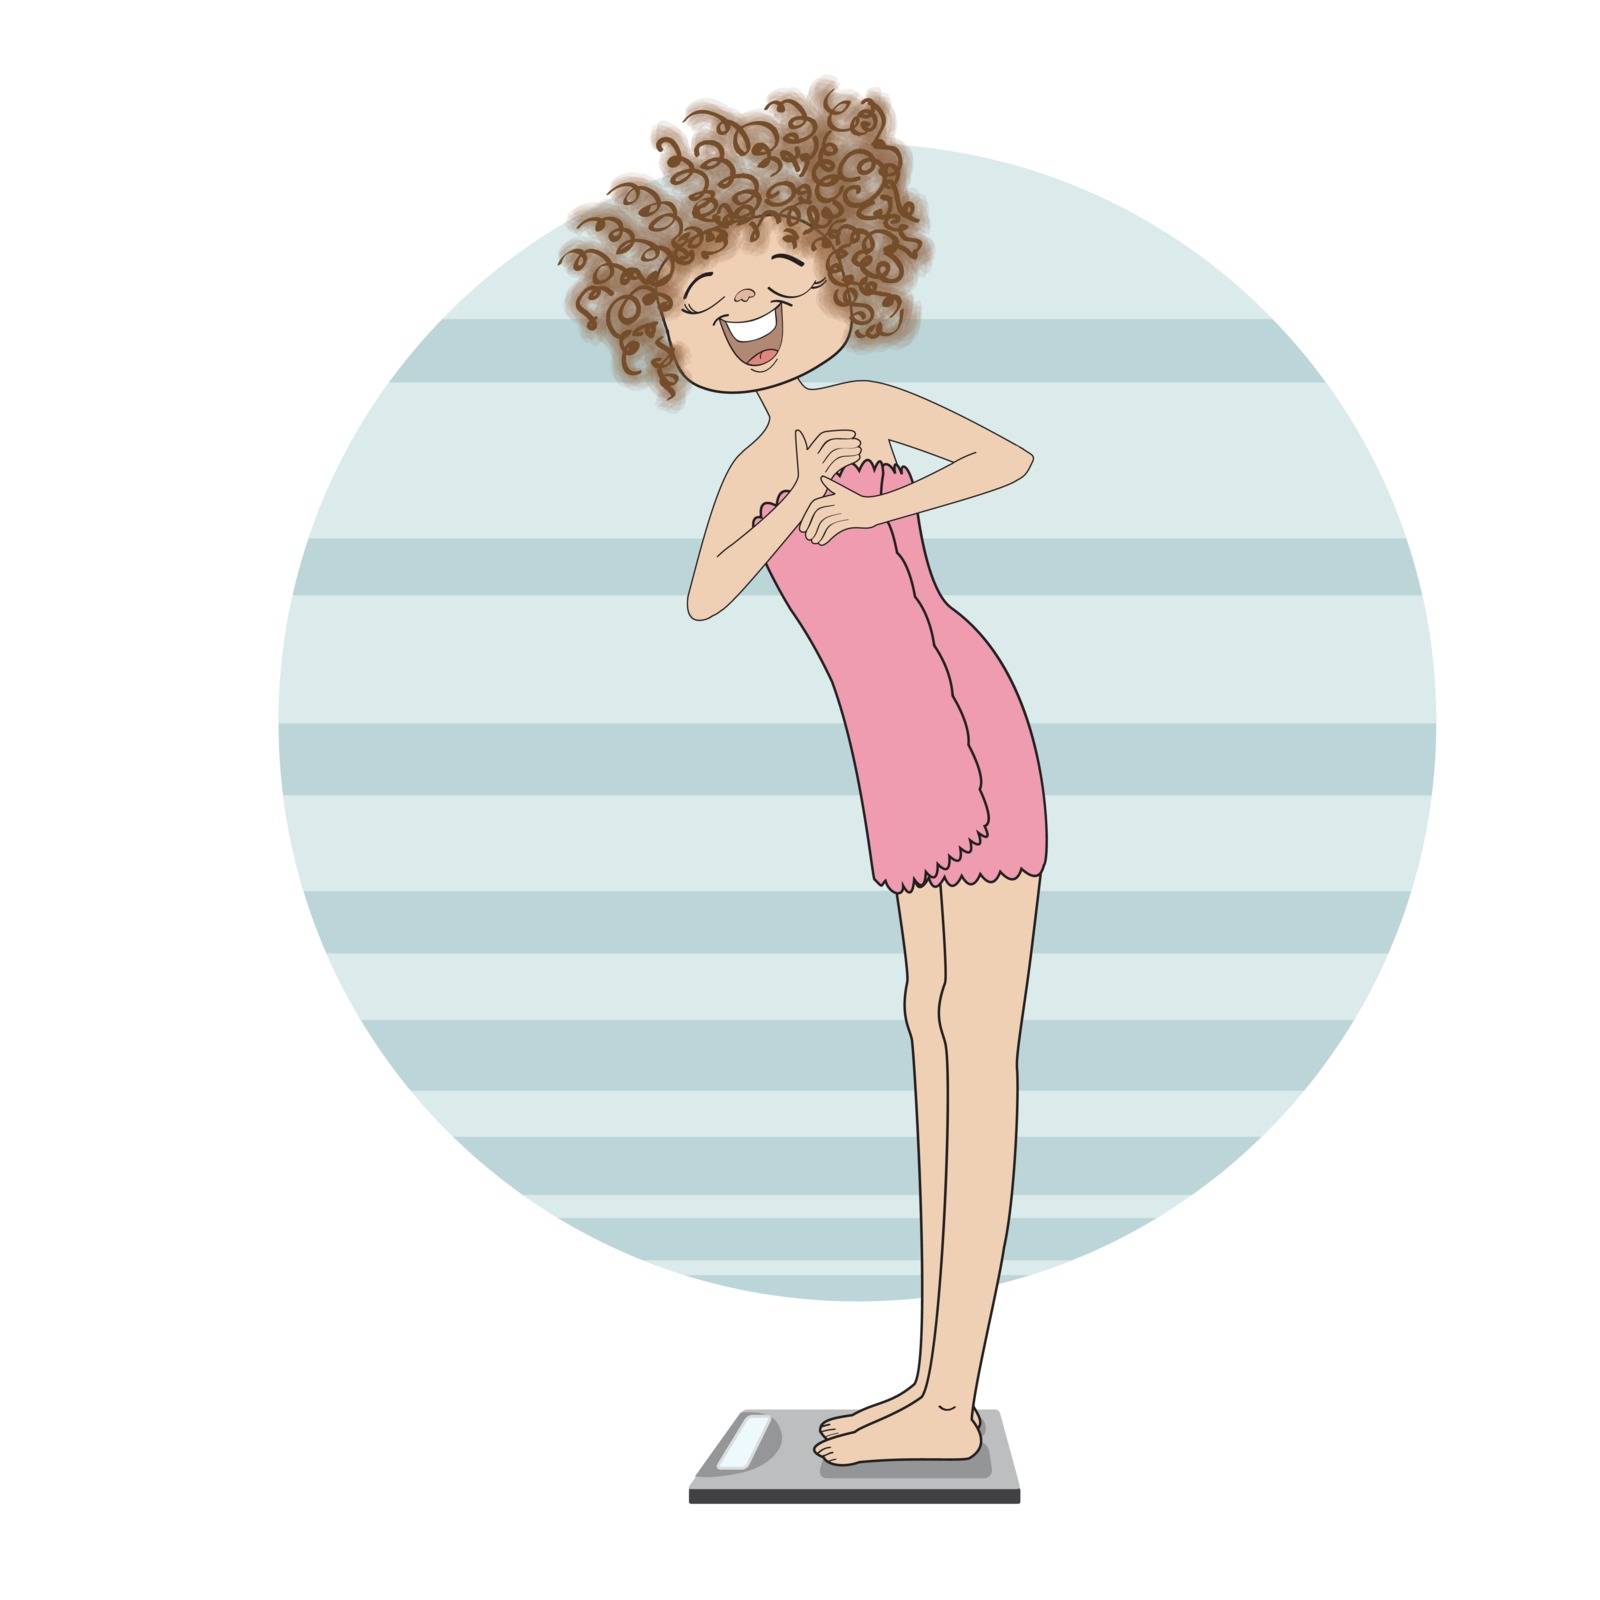 young woman at scale, illustration in vector format